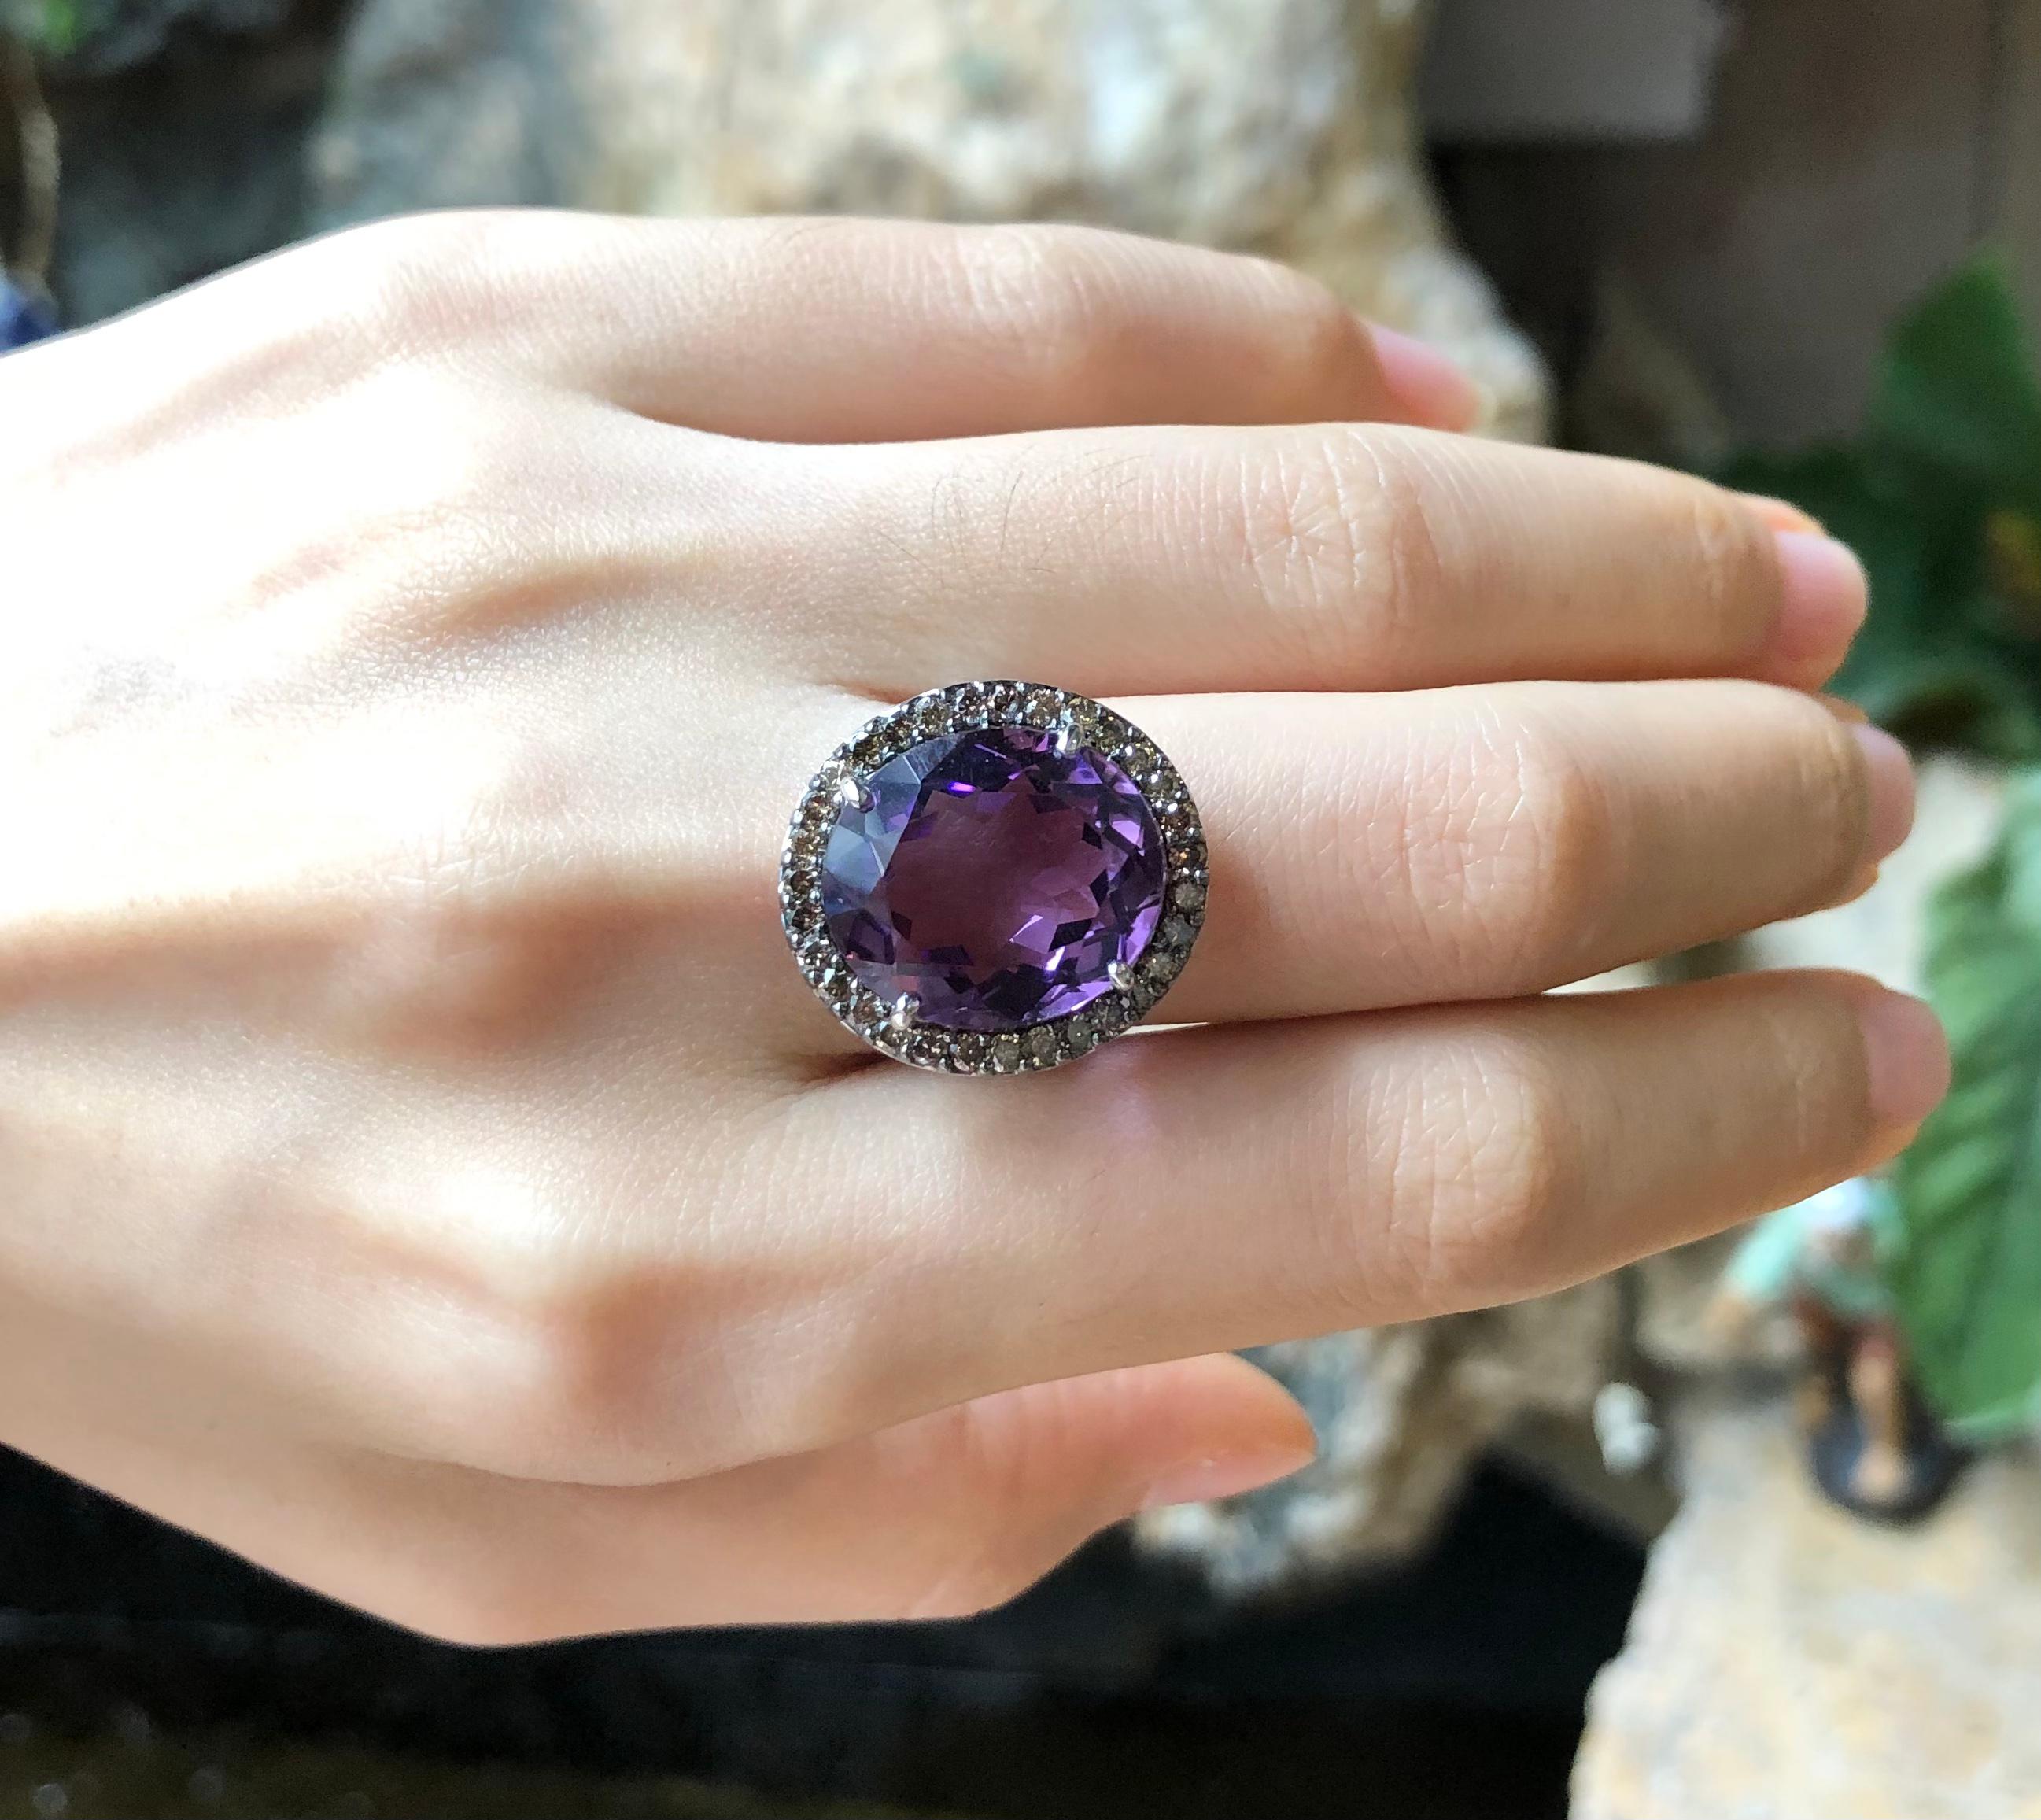 Amethyst 11.58 carats with Brown Diamond 1.03 carats Ring set in 18 Karat White Gold Settings

Width:  2.0 cm 
Length:  1.9 cm
Ring Size: 53
Total Weight: 8.61 grams

